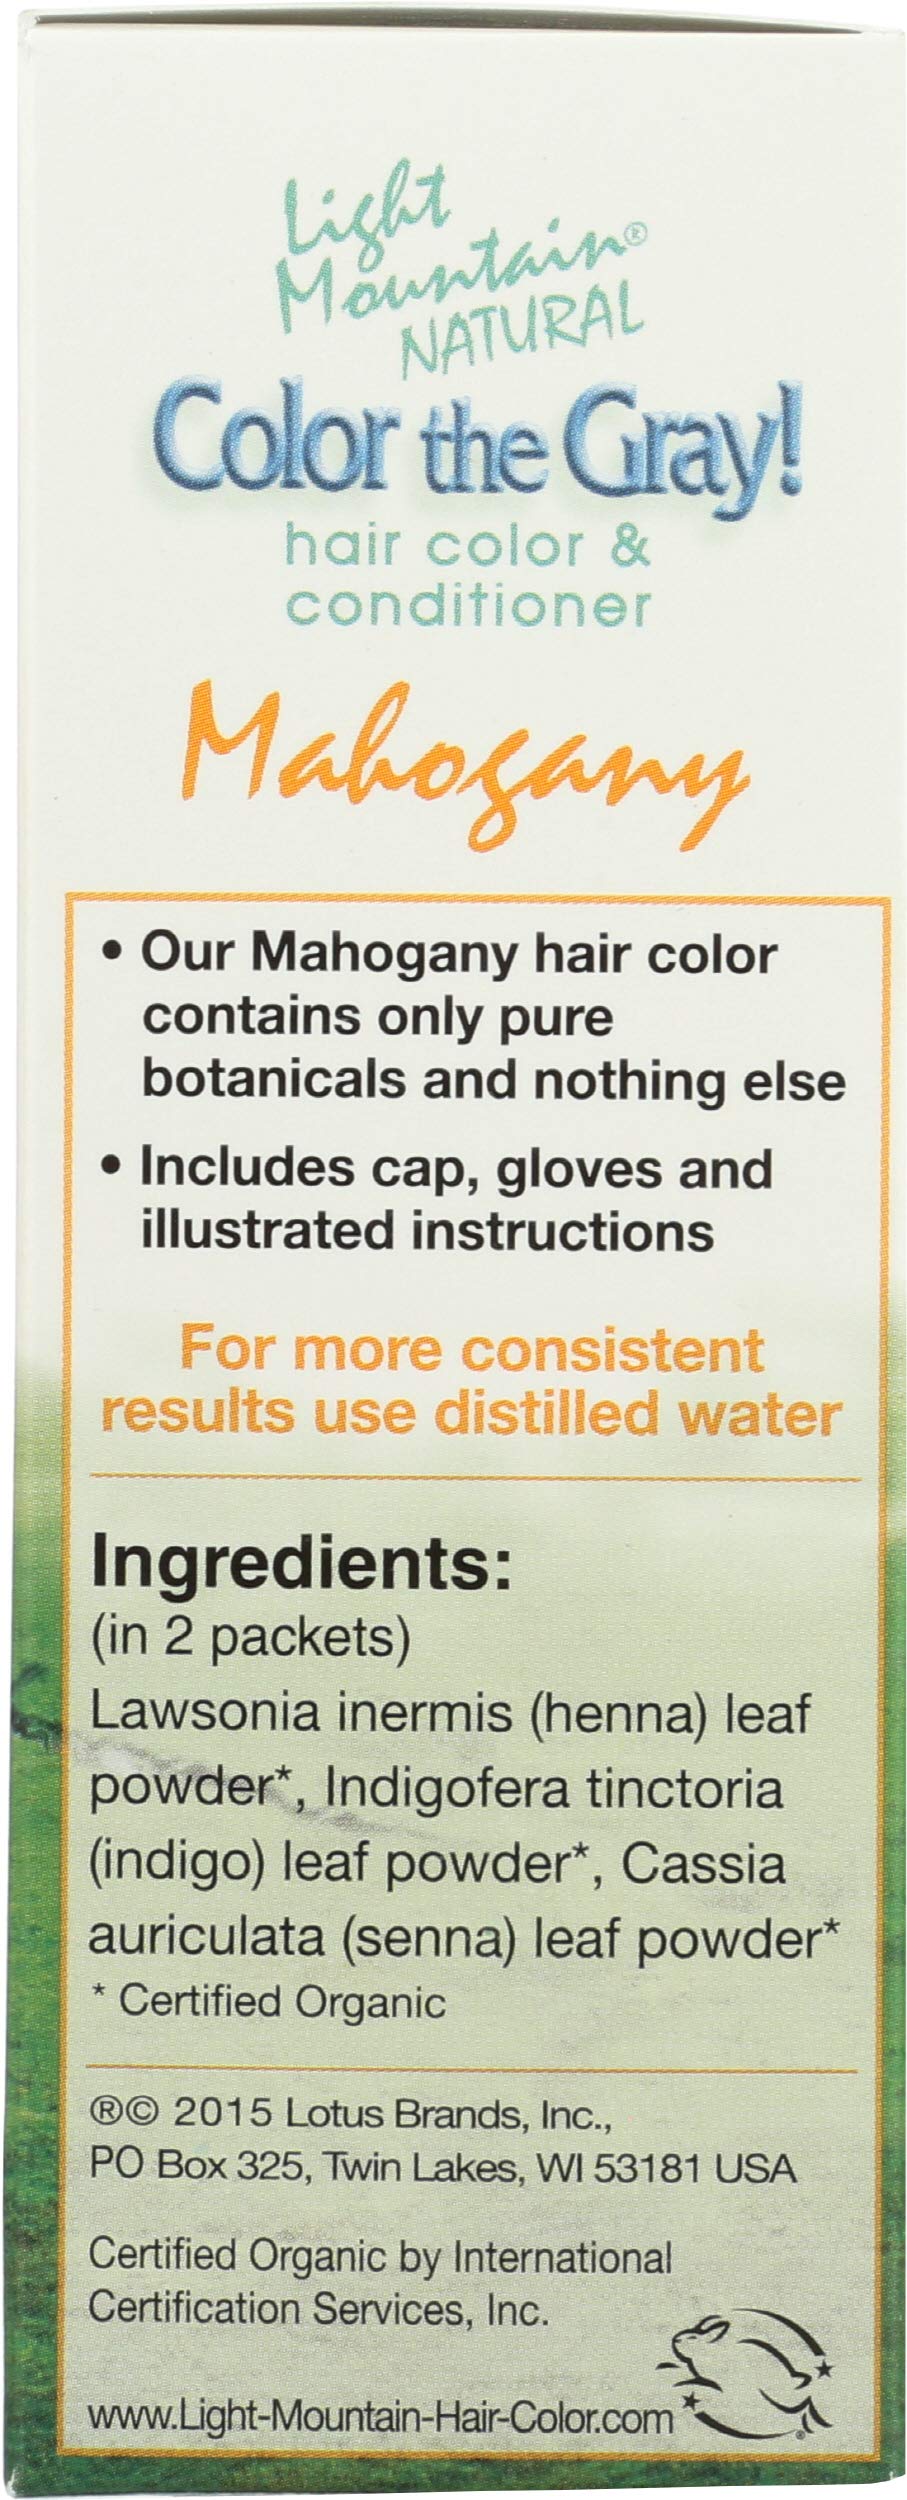 Light Mountain Natural Color The Gray! Hair Color & Conditioner, Mahogany, 7 oz.